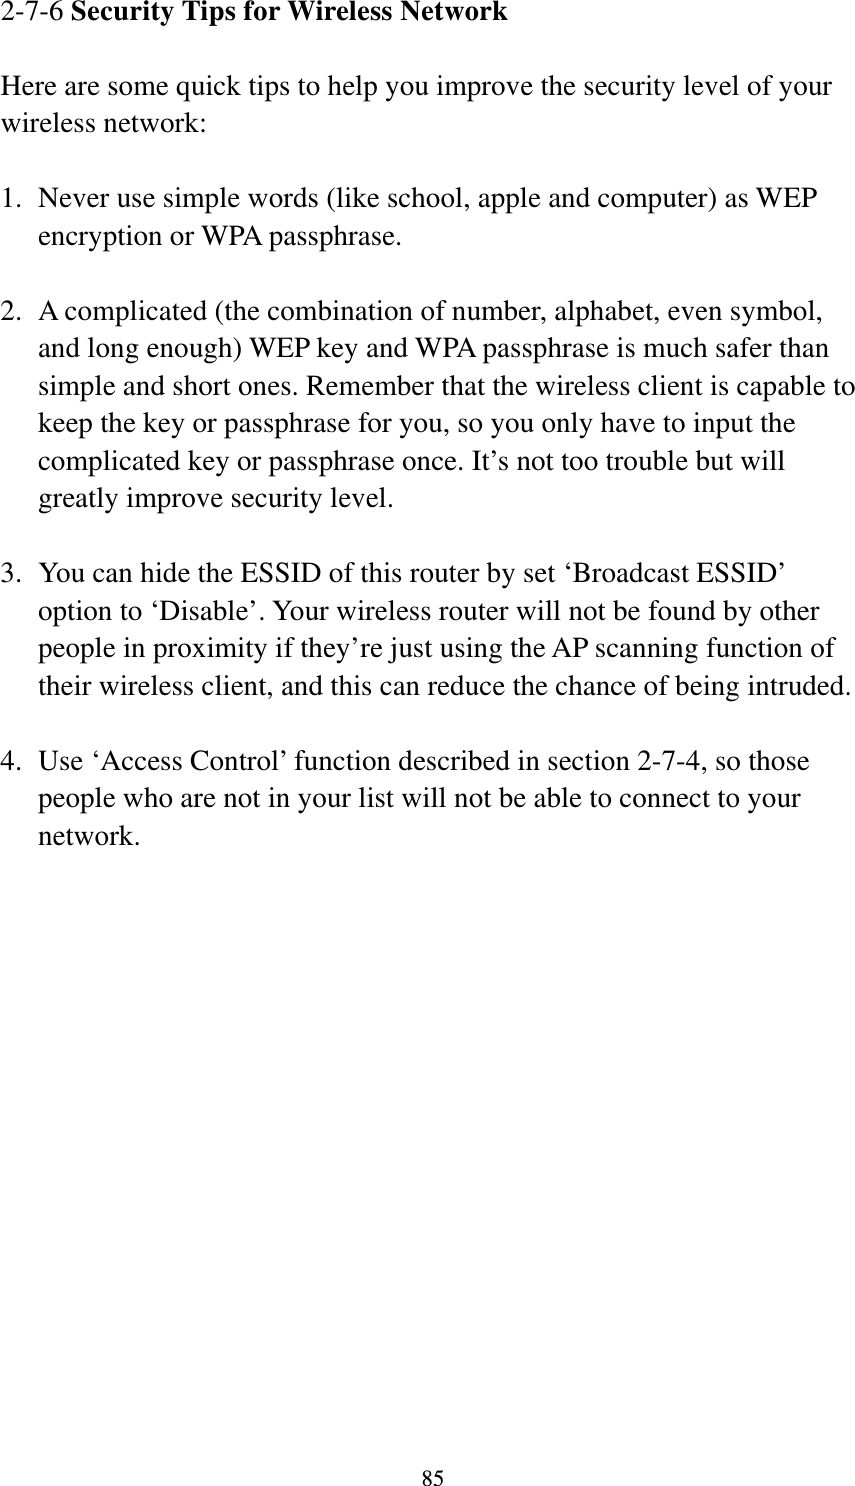 85 2-7-6 Security Tips for Wireless Network  Here are some quick tips to help you improve the security level of your wireless network:  1. Never use simple words (like school, apple and computer) as WEP encryption or WPA passphrase.  2. A complicated (the combination of number, alphabet, even symbol, and long enough) WEP key and WPA passphrase is much safer than simple and short ones. Remember that the wireless client is capable to keep the key or passphrase for you, so you only have to input the complicated key or passphrase once. It’s not too trouble but will greatly improve security level.  3. You can hide the ESSID of this router by set ‘Broadcast ESSID’ option to ‘Disable’. Your wireless router will not be found by other people in proximity if they’re just using the AP scanning function of their wireless client, and this can reduce the chance of being intruded.  4. Use ‘Access Control’ function described in section 2-7-4, so those people who are not in your list will not be able to connect to your network. 